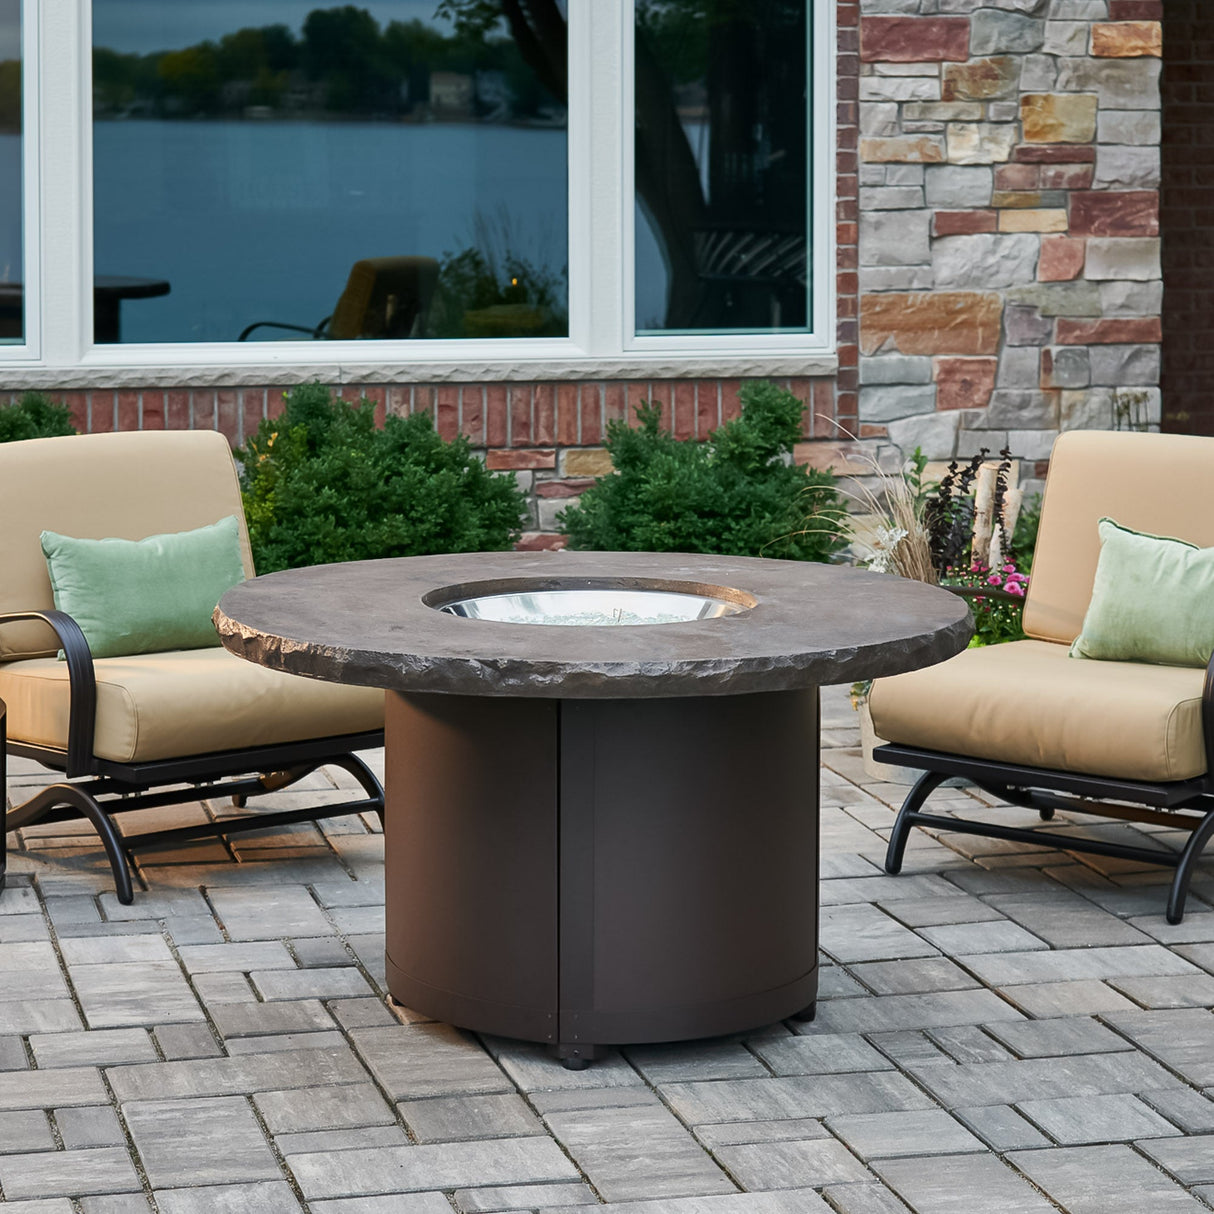 The Marbleized Noche Beacon Round Gas Fire Pit Table in an outdoor setting